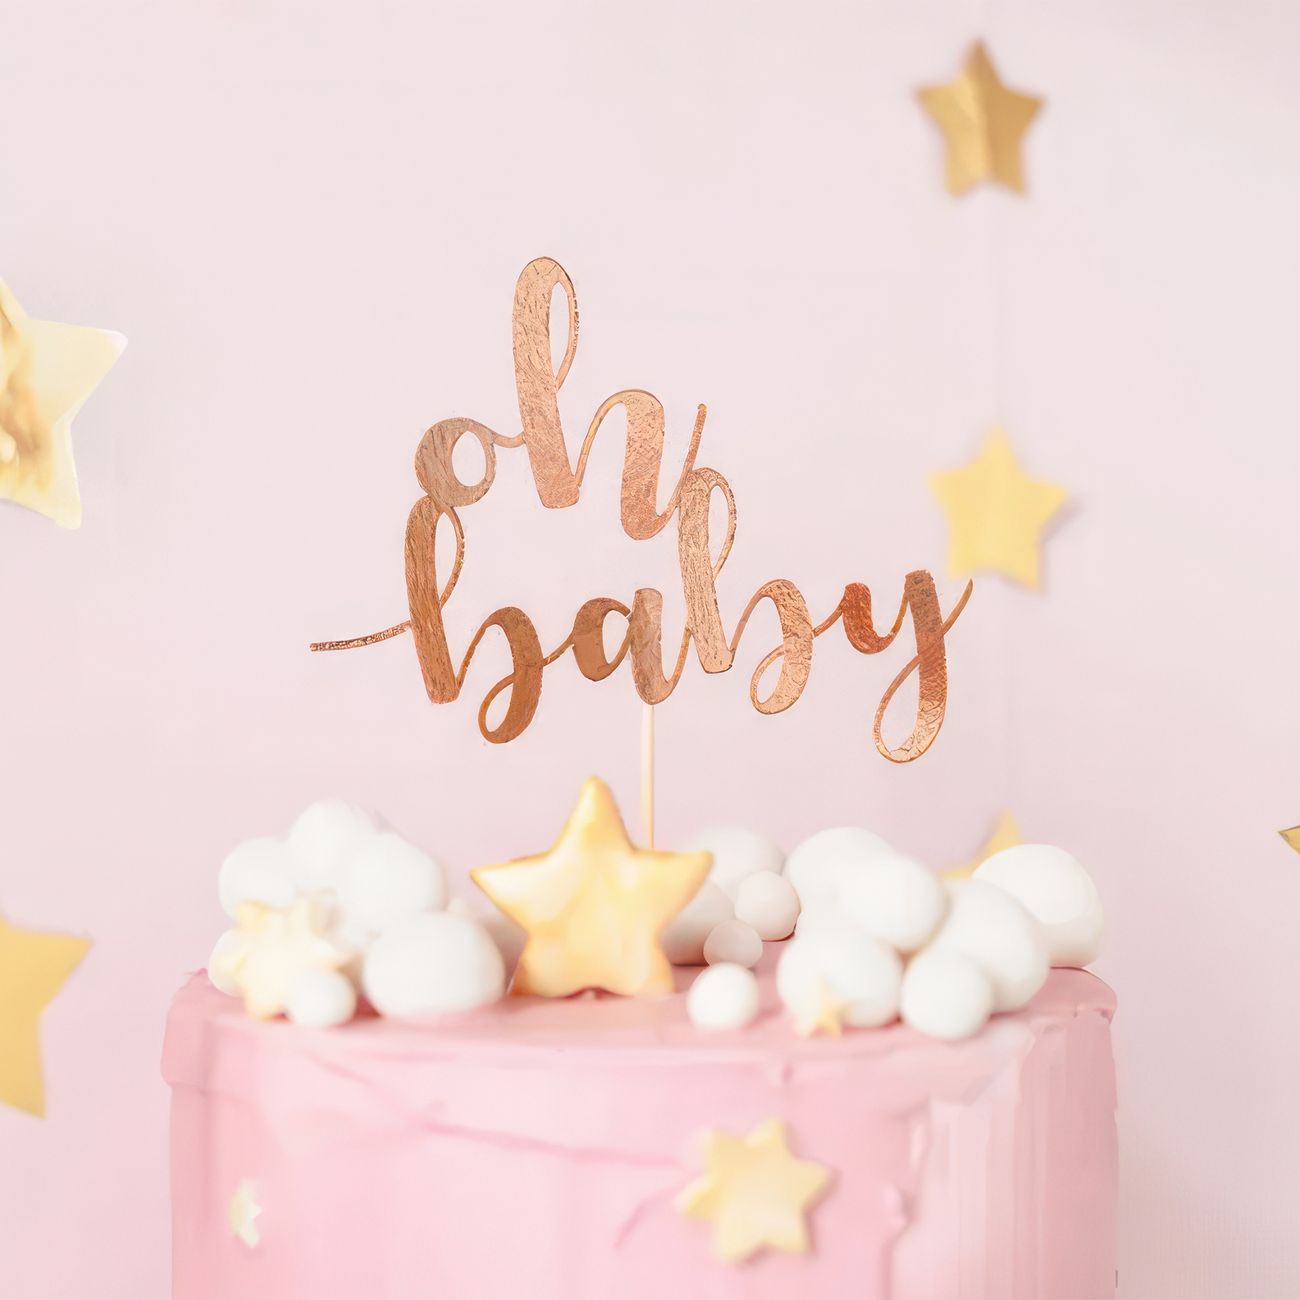 cake-topper-oh-baby-rose-gold-93900-2